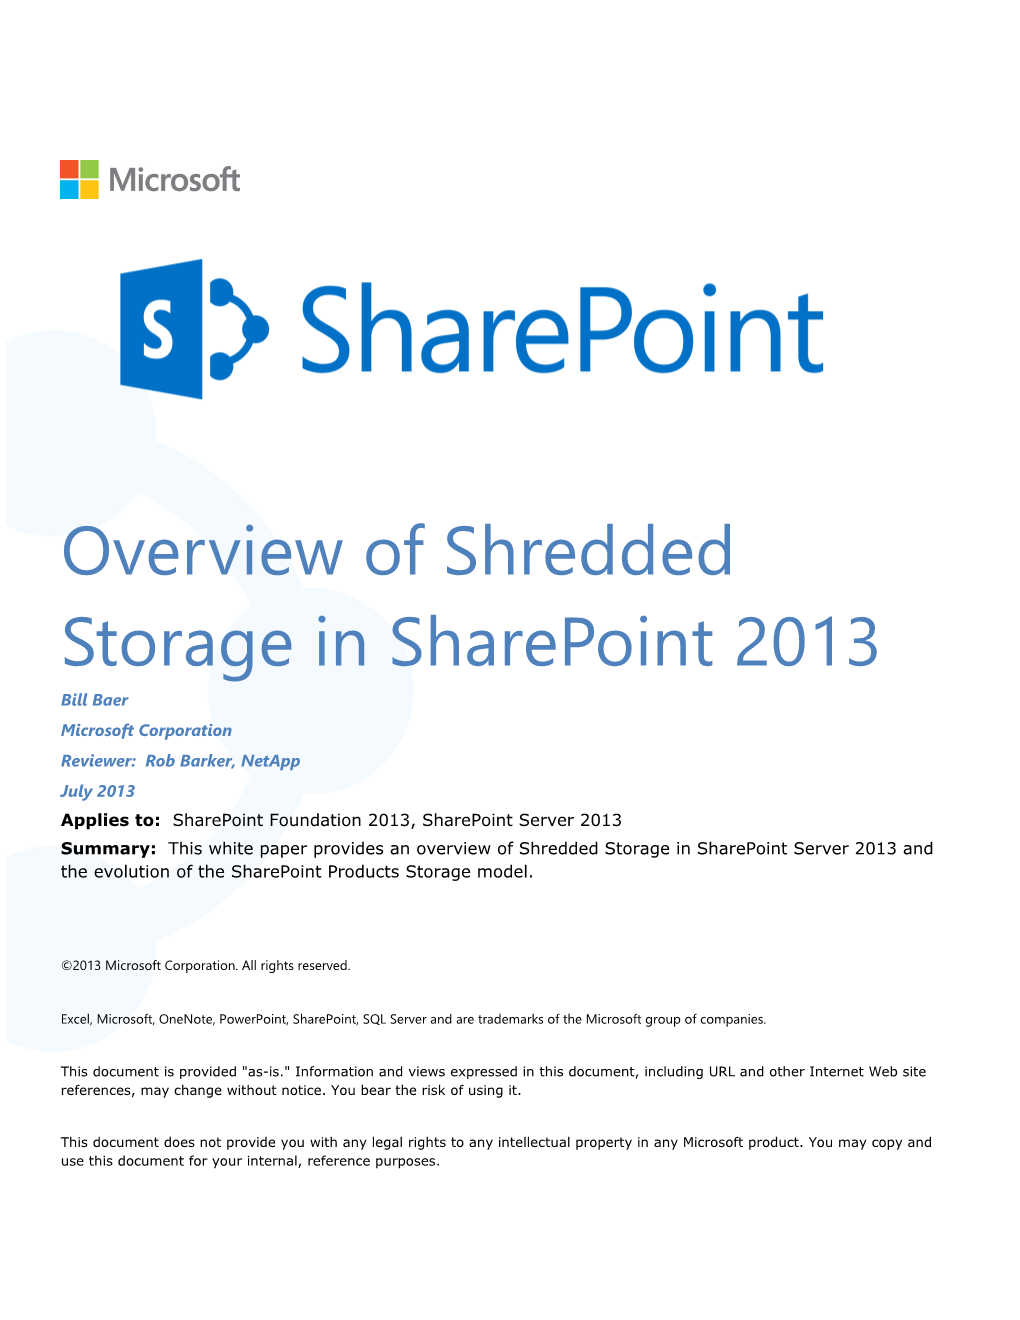 Overview of Shredded Storage in Sharepoint 2013